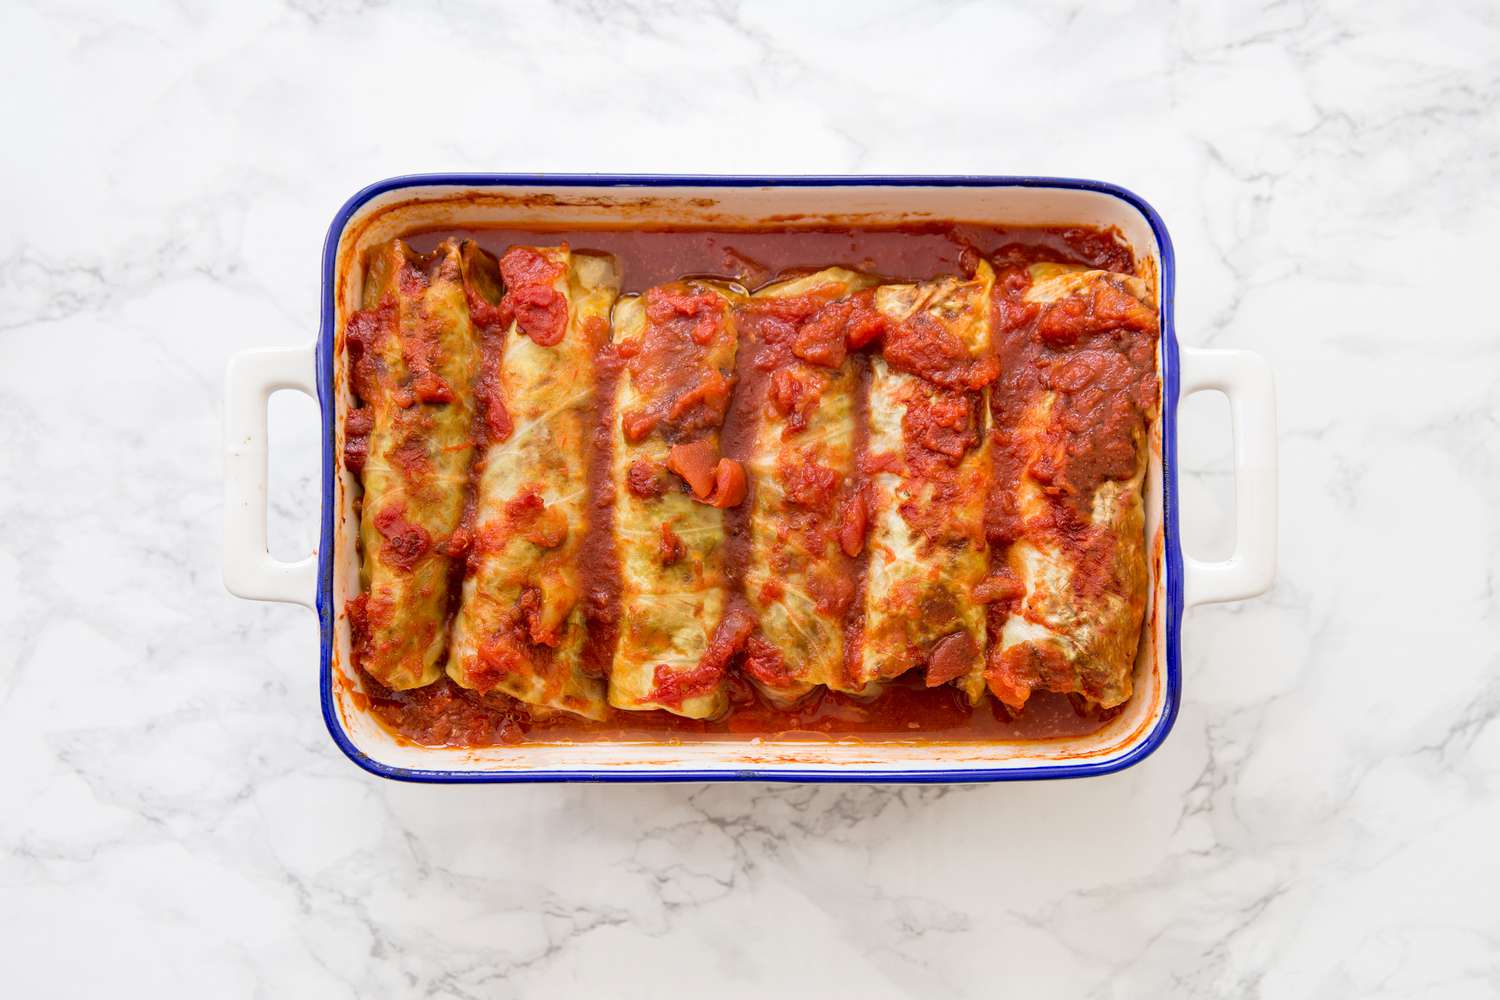 Baked cabbage rolls covered in tomato red sauce